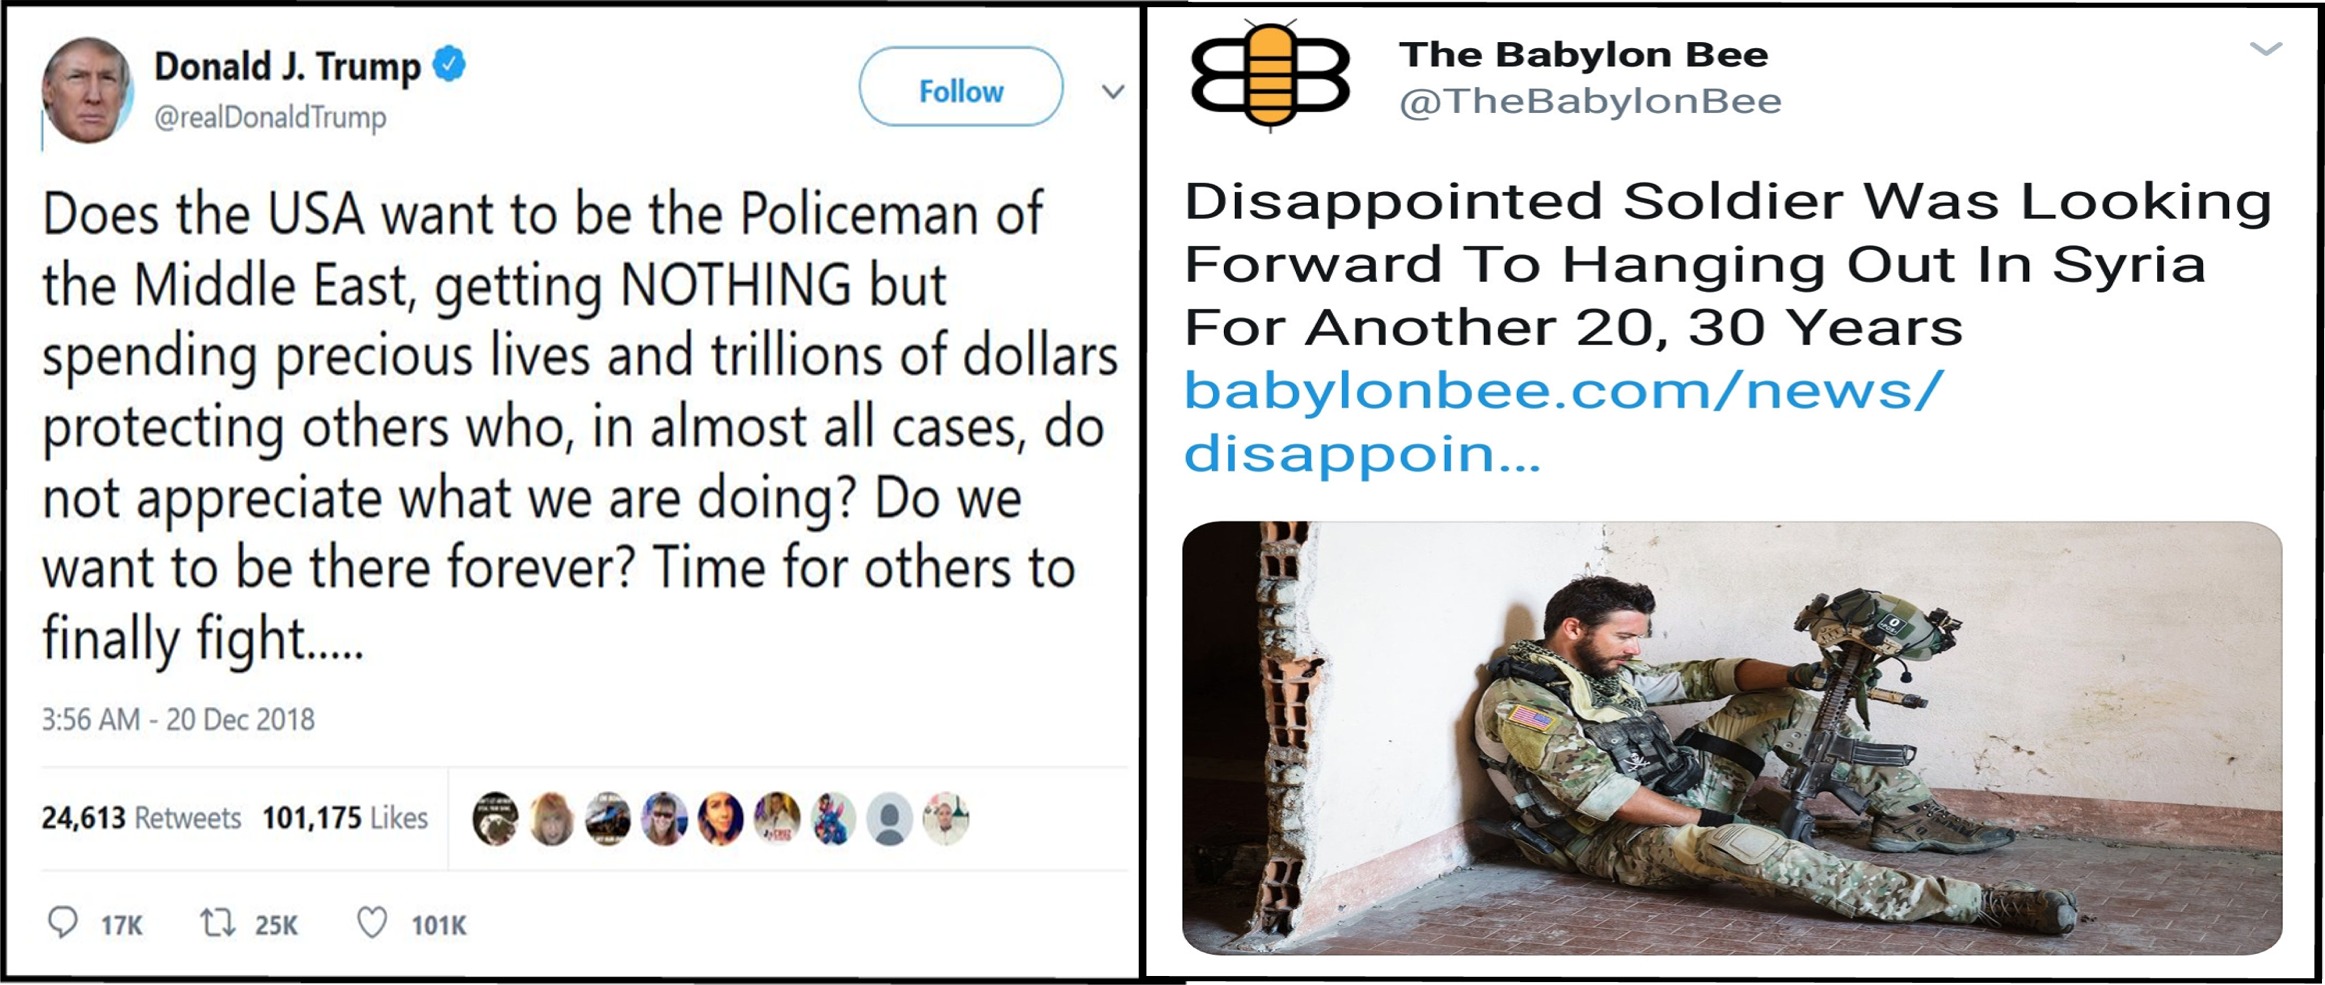 memes - web page - b D The Babylon Bee Bee Donald J. Trump Donald Trump Does the Usa want to be the Policeman of the Middle East, getting Nothing but spending precious lives and trillions of dollars protecting others who, in almost all cases, do not appre